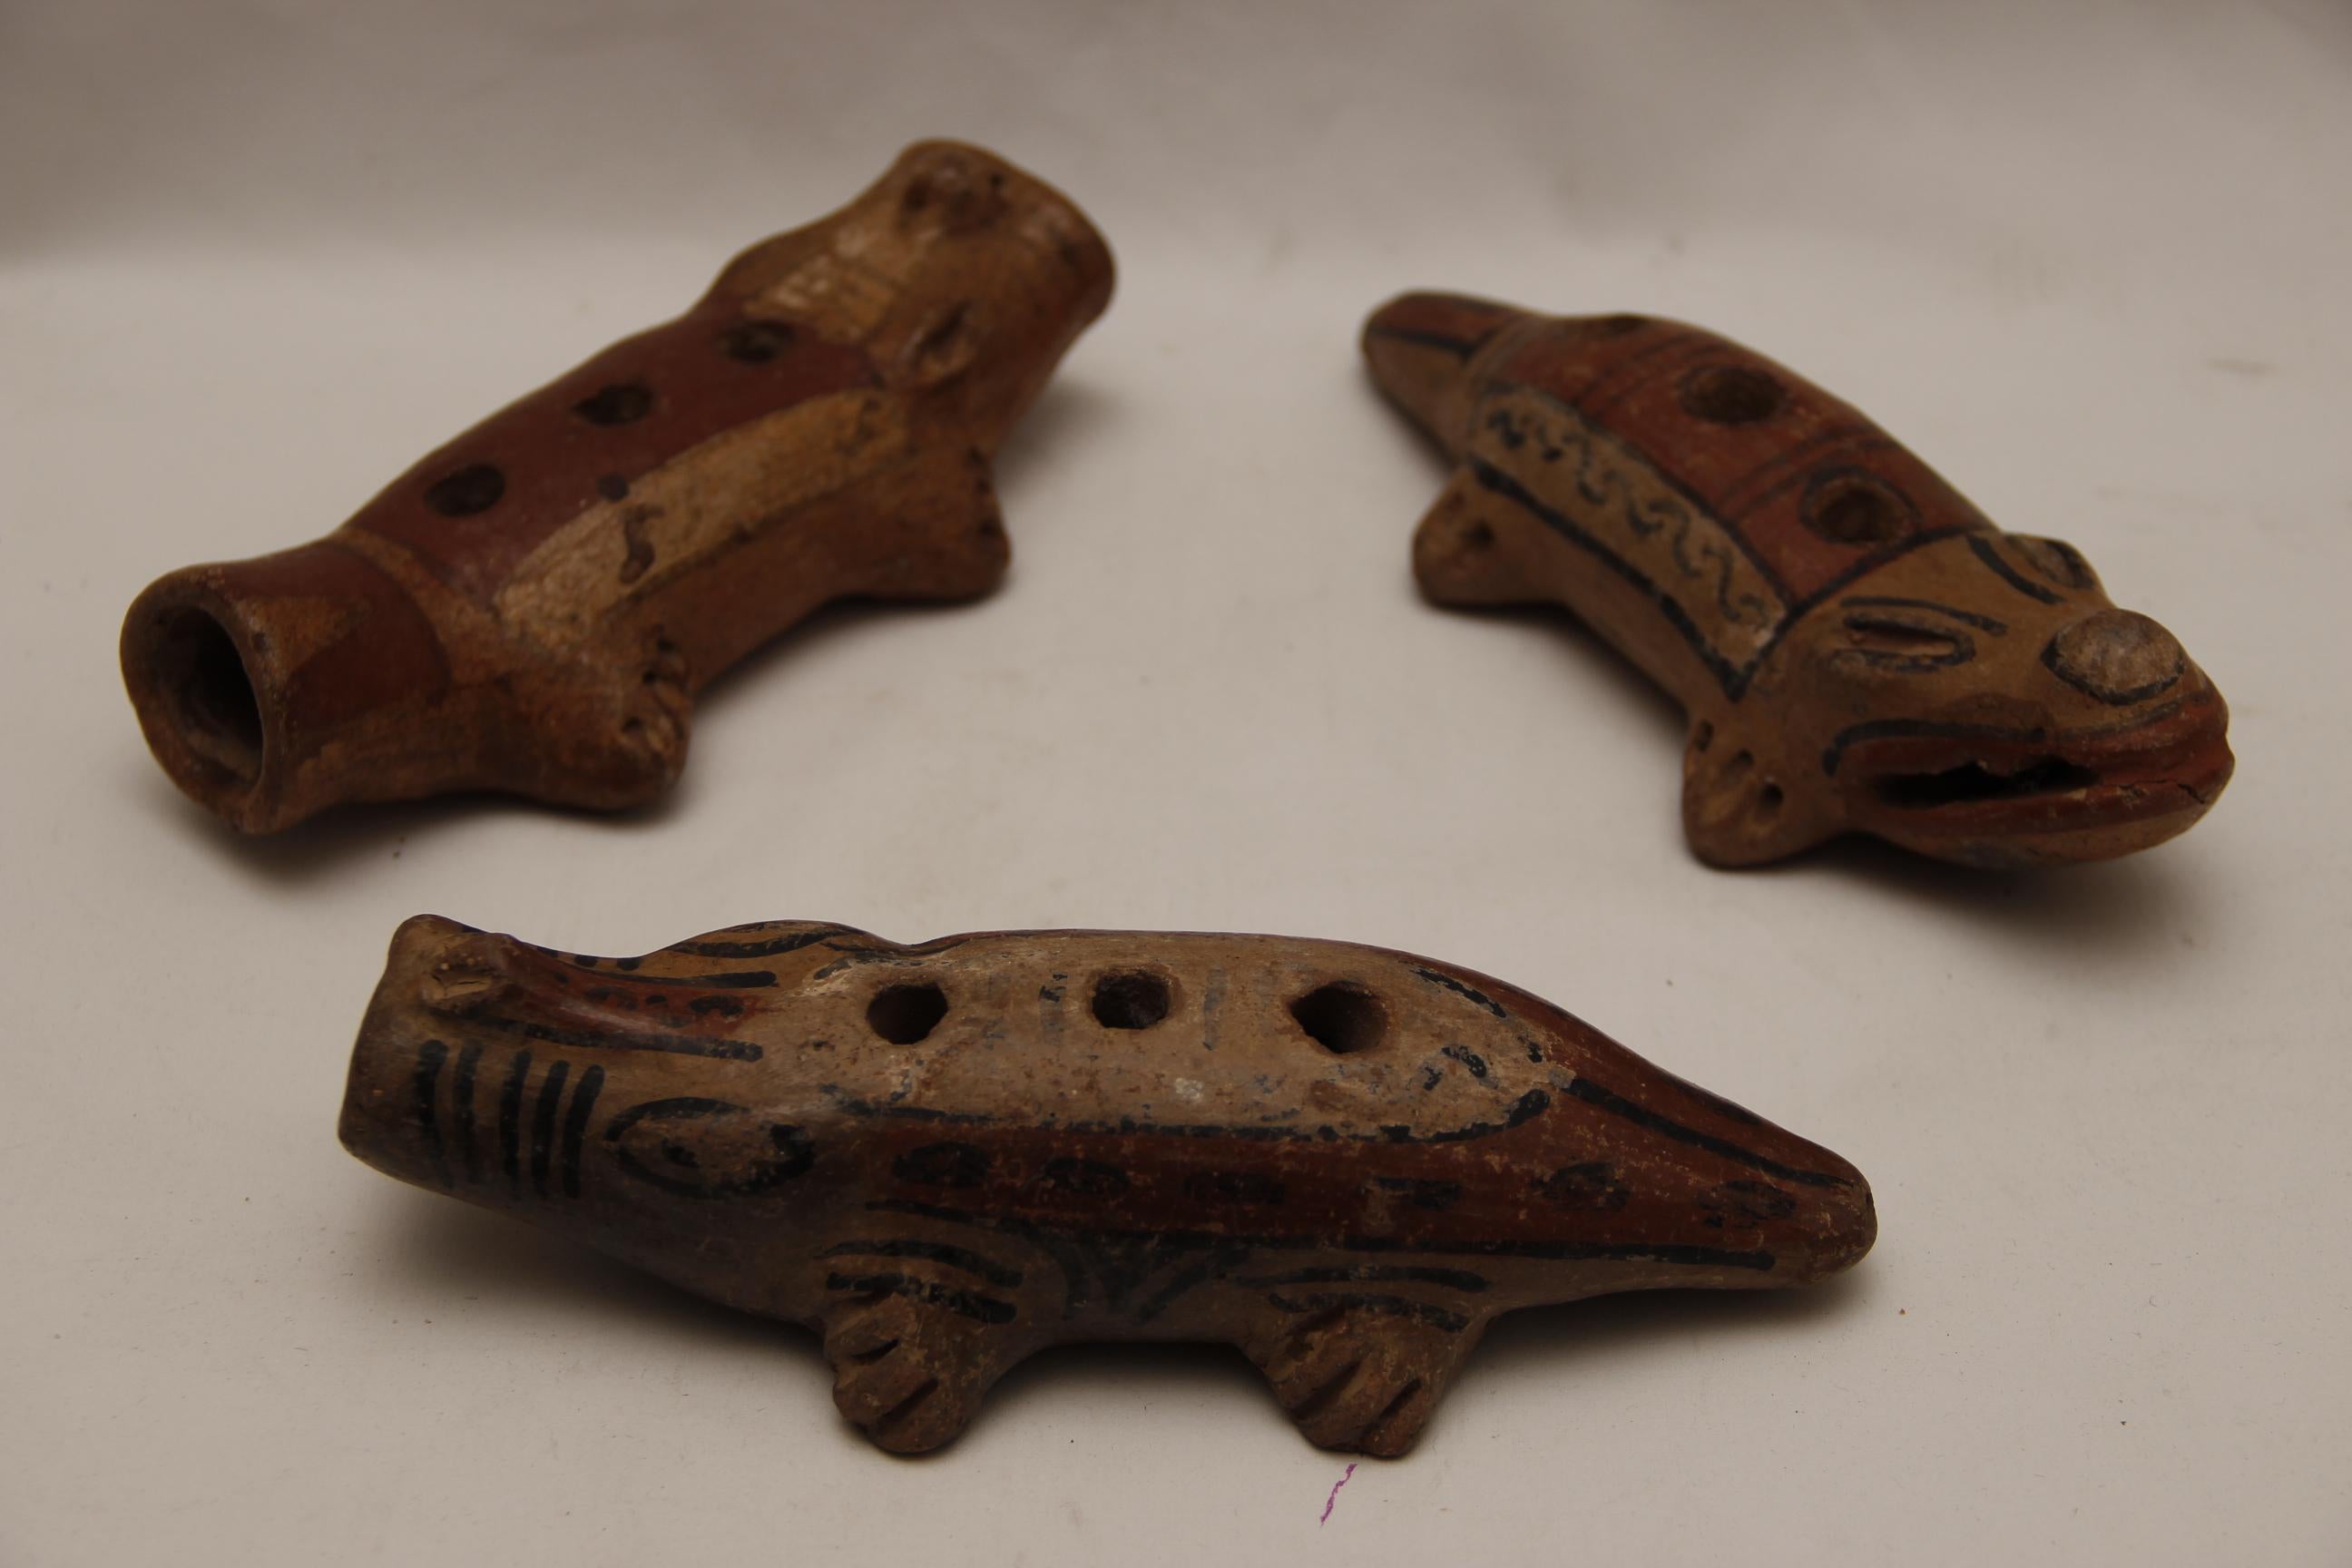 Antique Indian Pipes - 3 For Sale on 1stDibs